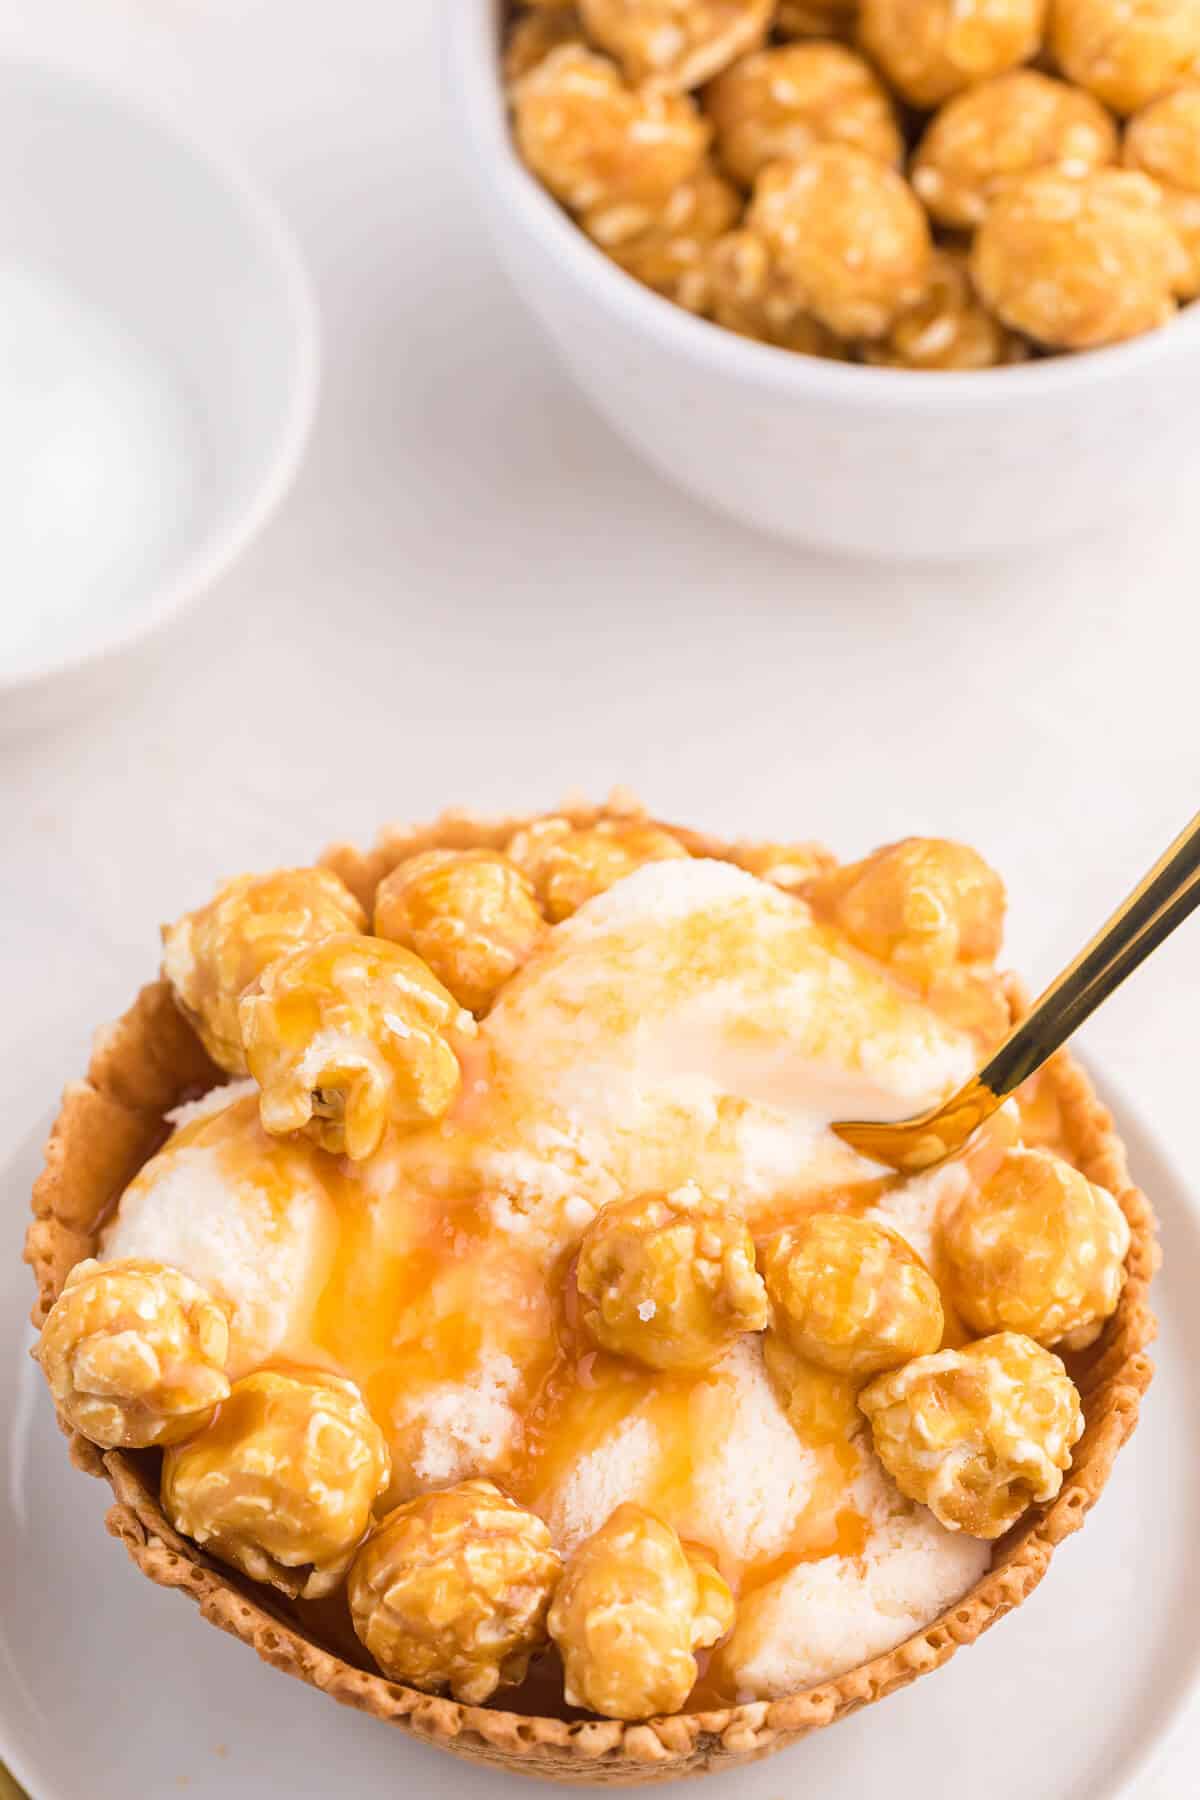 Caramel crunch ice cream sundae on a plate with a small gold spoon in it.